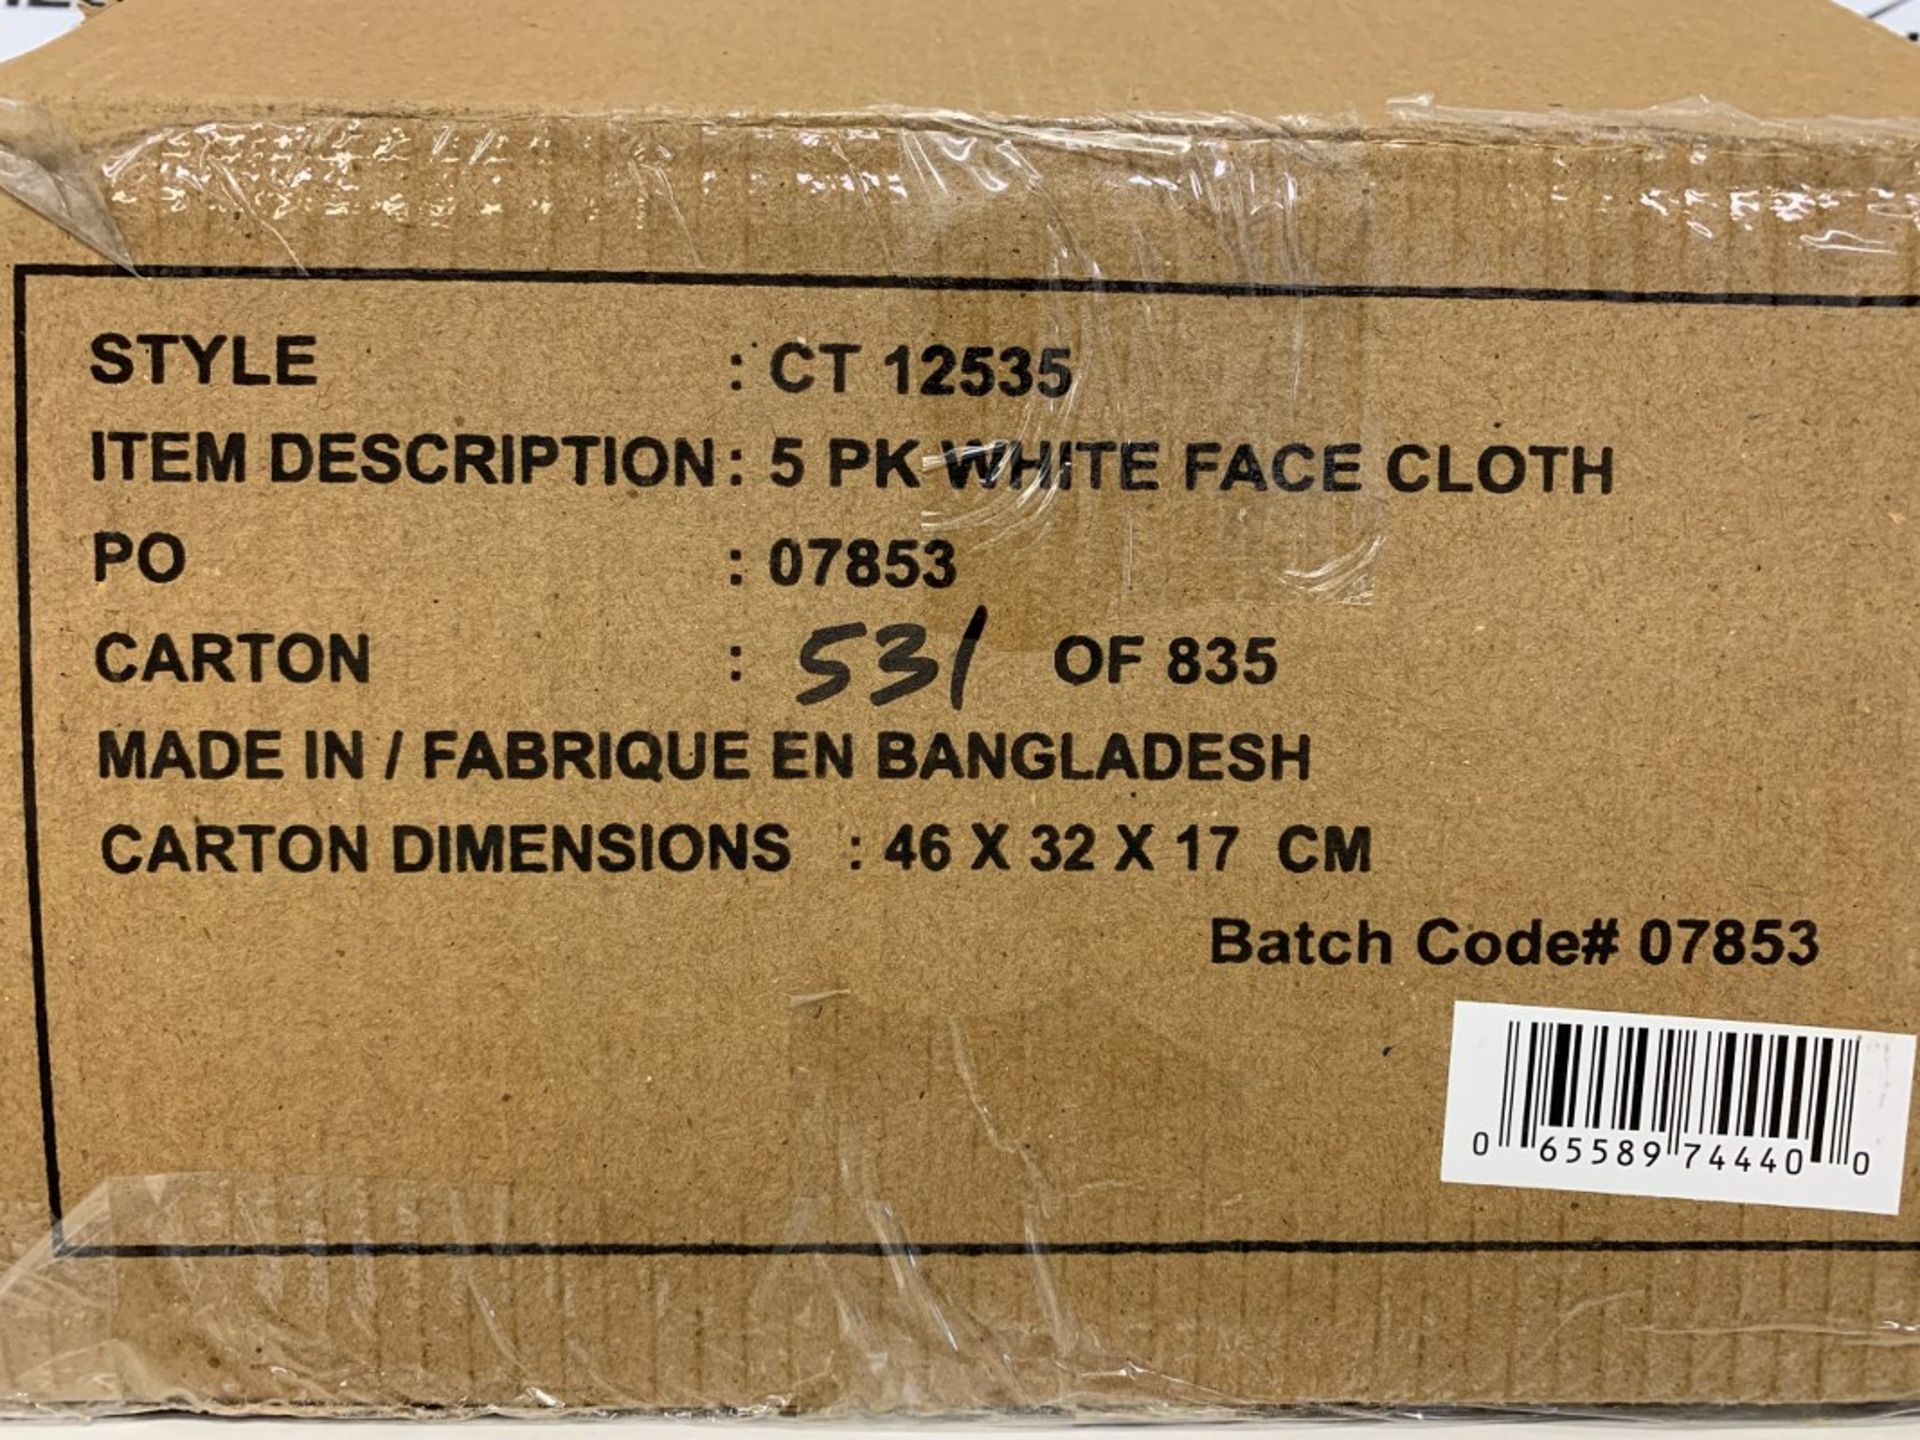 Box Of 5 Pack White Cotton Face Cloth - Image 2 of 2